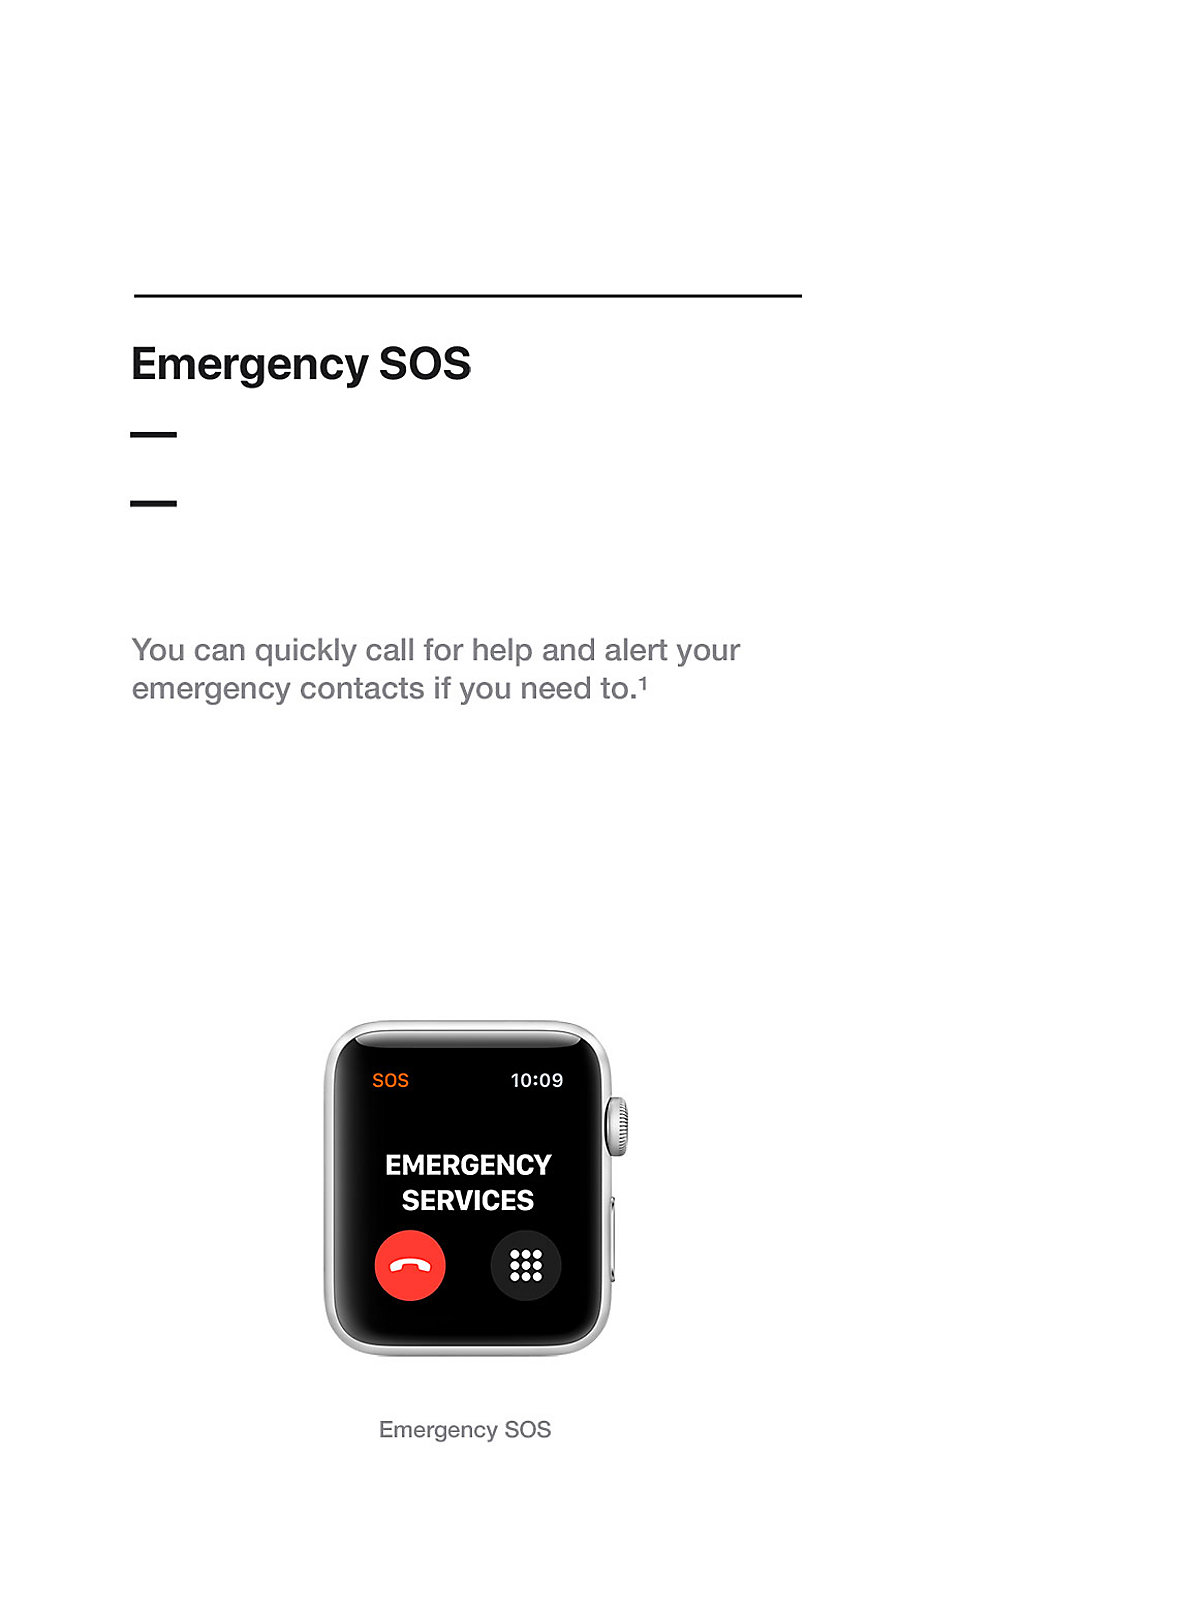 Apple Watch Safety and Emergency Series 3